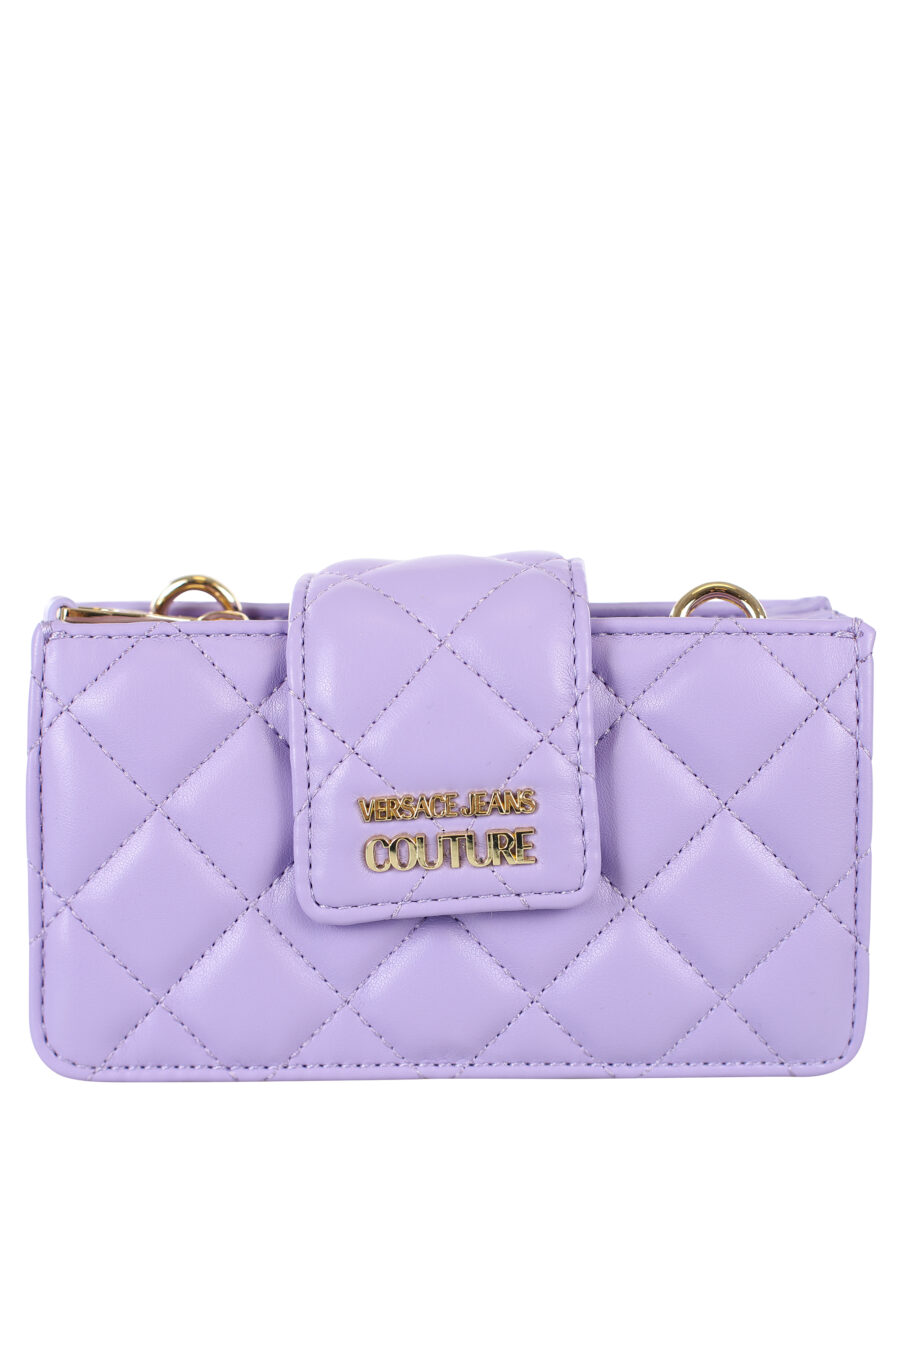 Purple shoulder bag with chain charms - IMG 7249